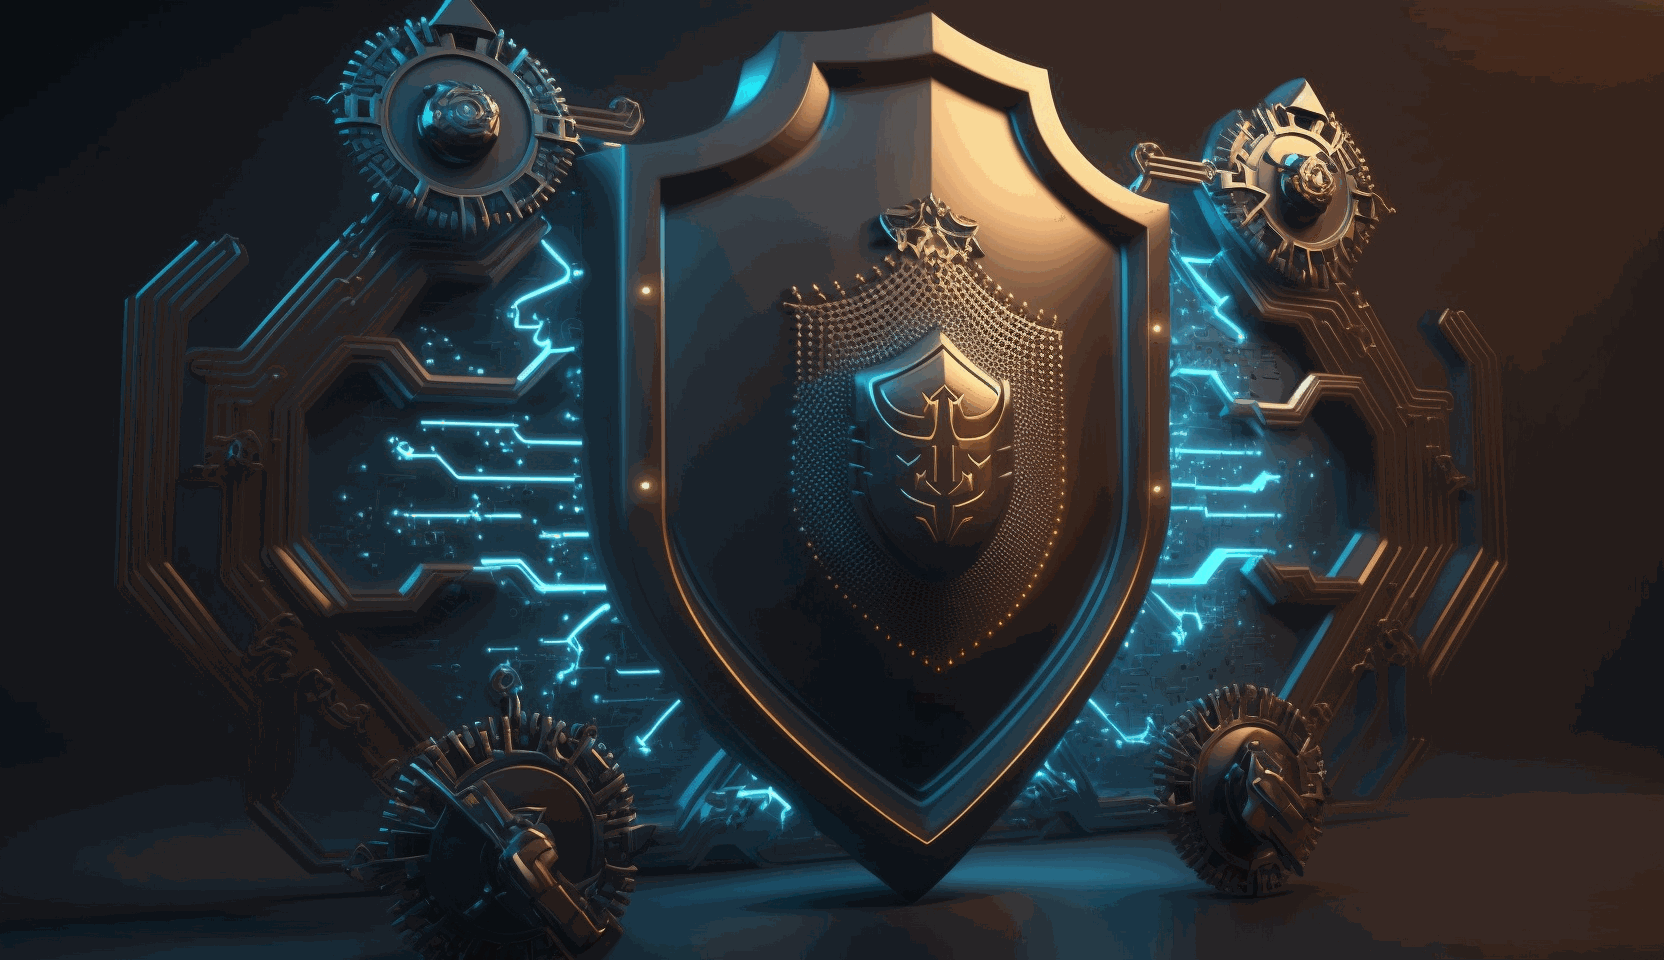 A 3D animated image of a shield protecting a group of connected IoT devices, symbolizing the importance of cybersecurity for IoT networks.